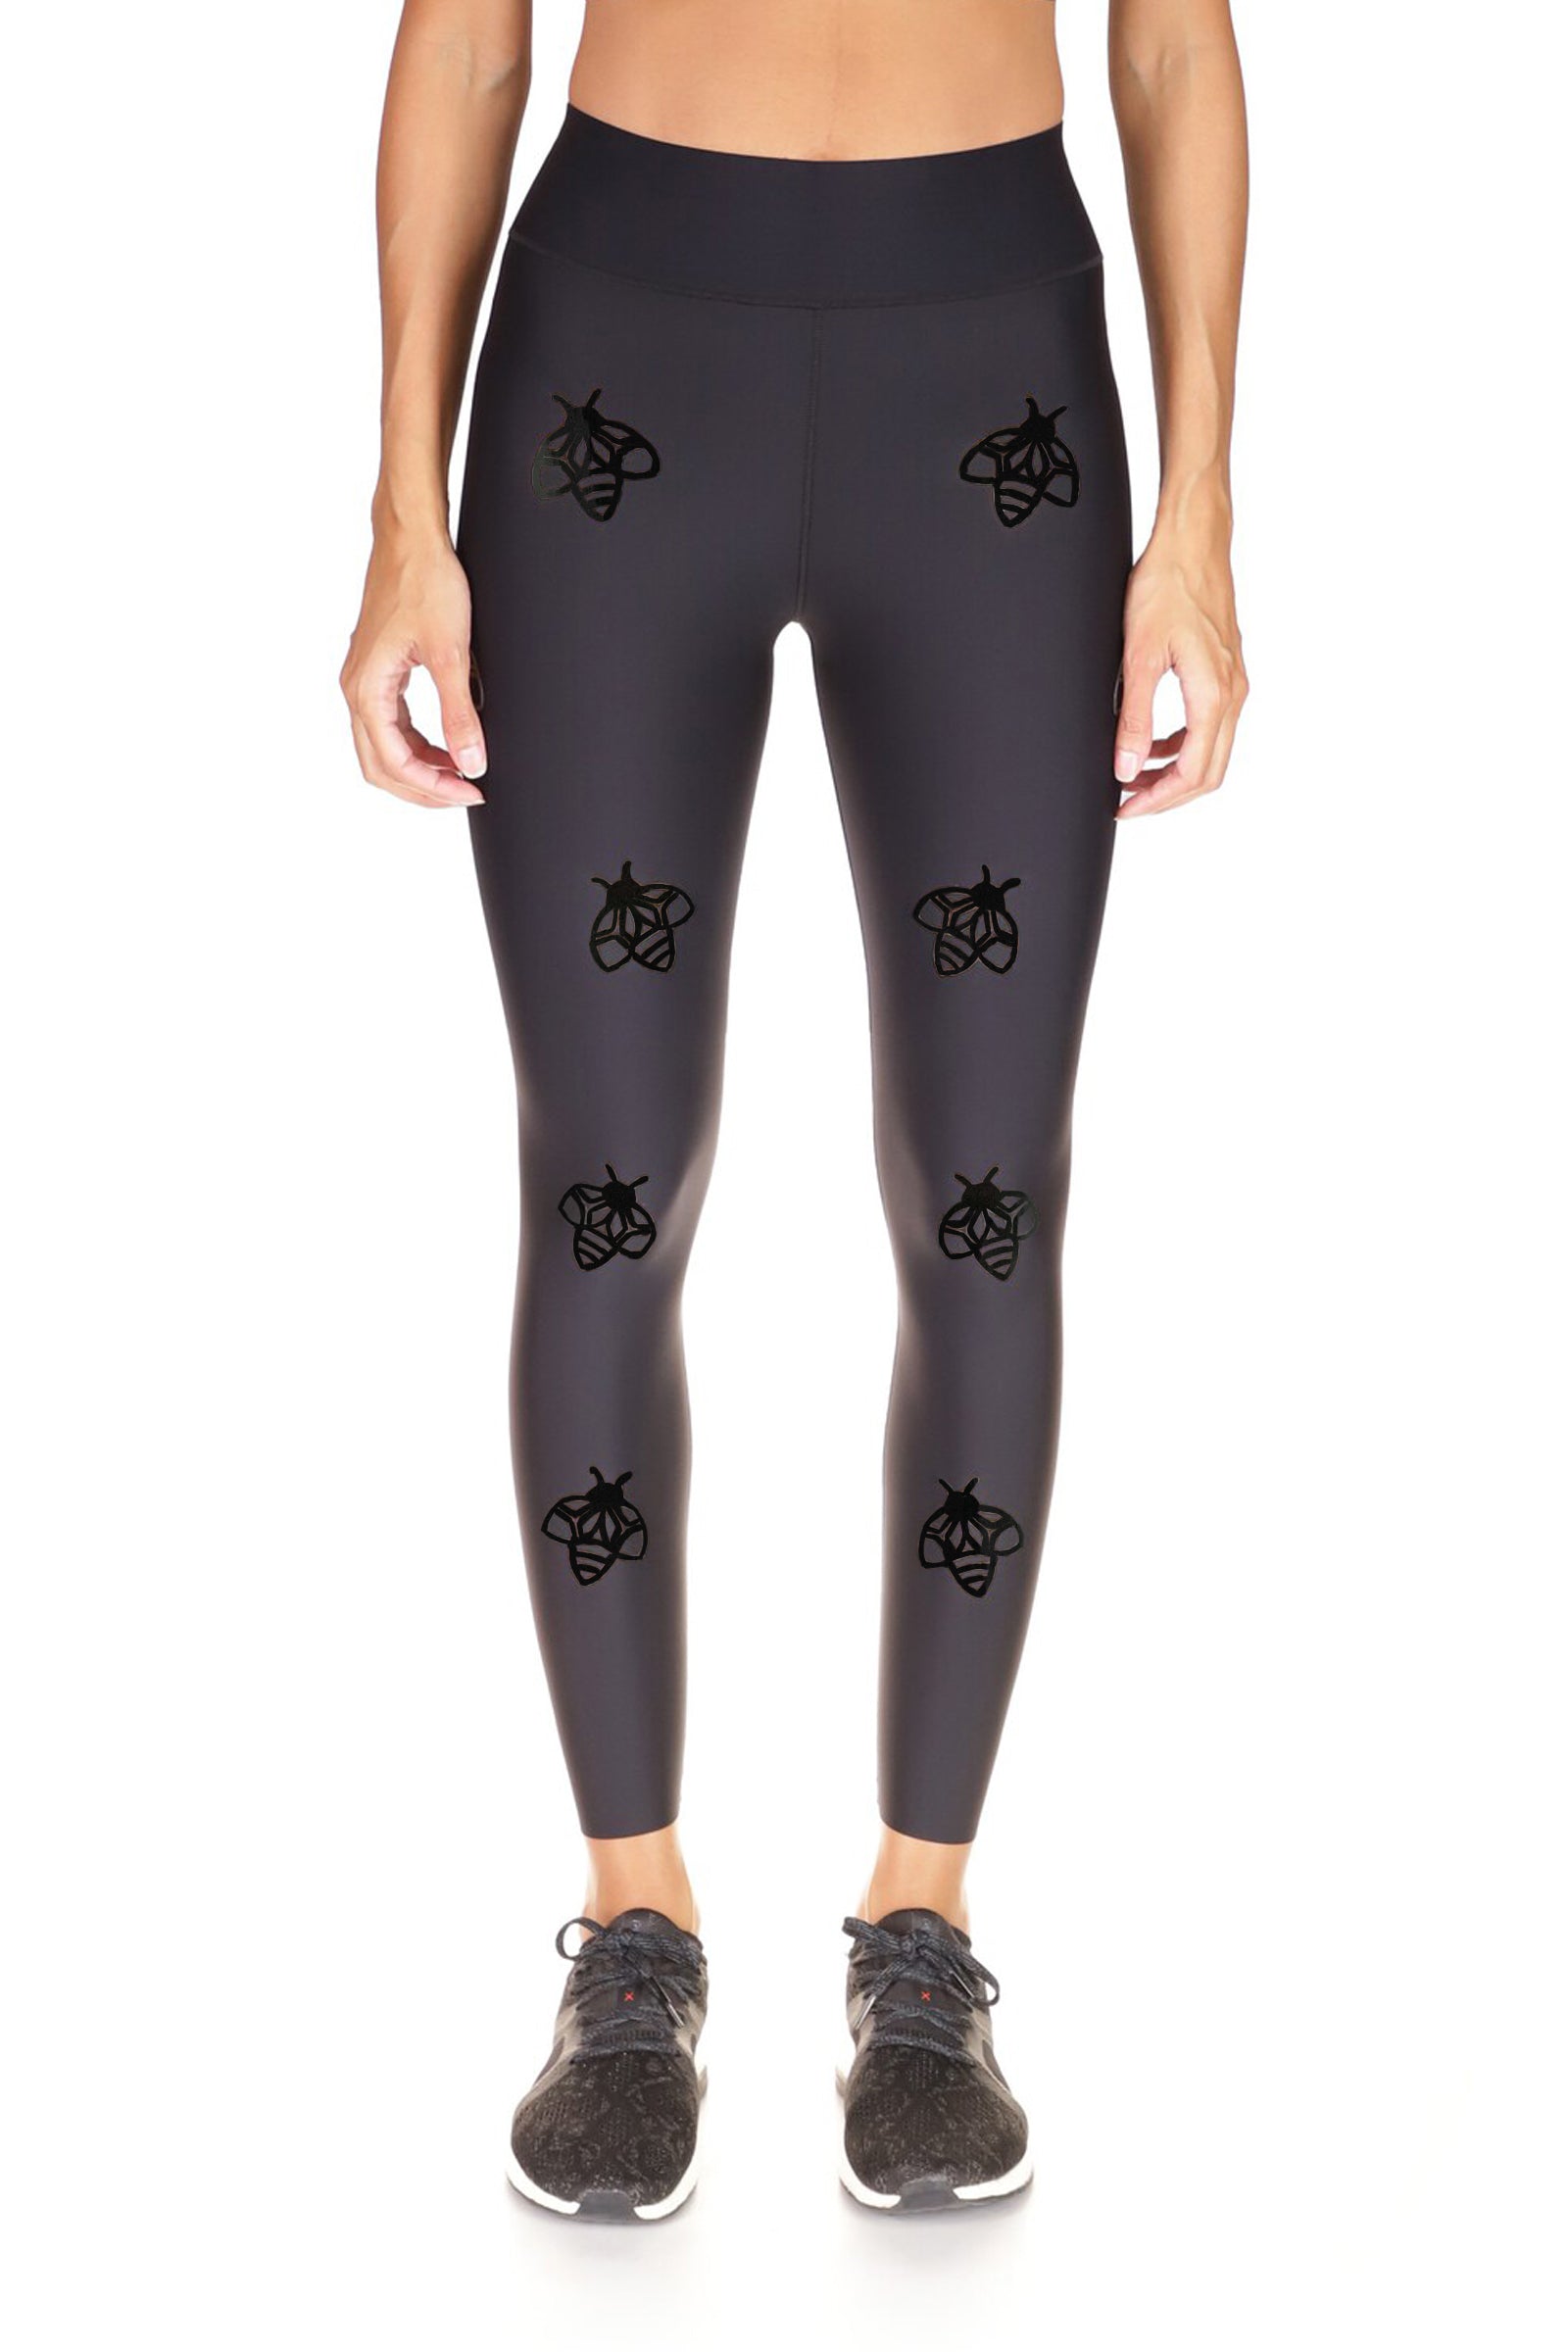 Ultra High Knock Out Legging Nero Patent Nero by Ultracor at